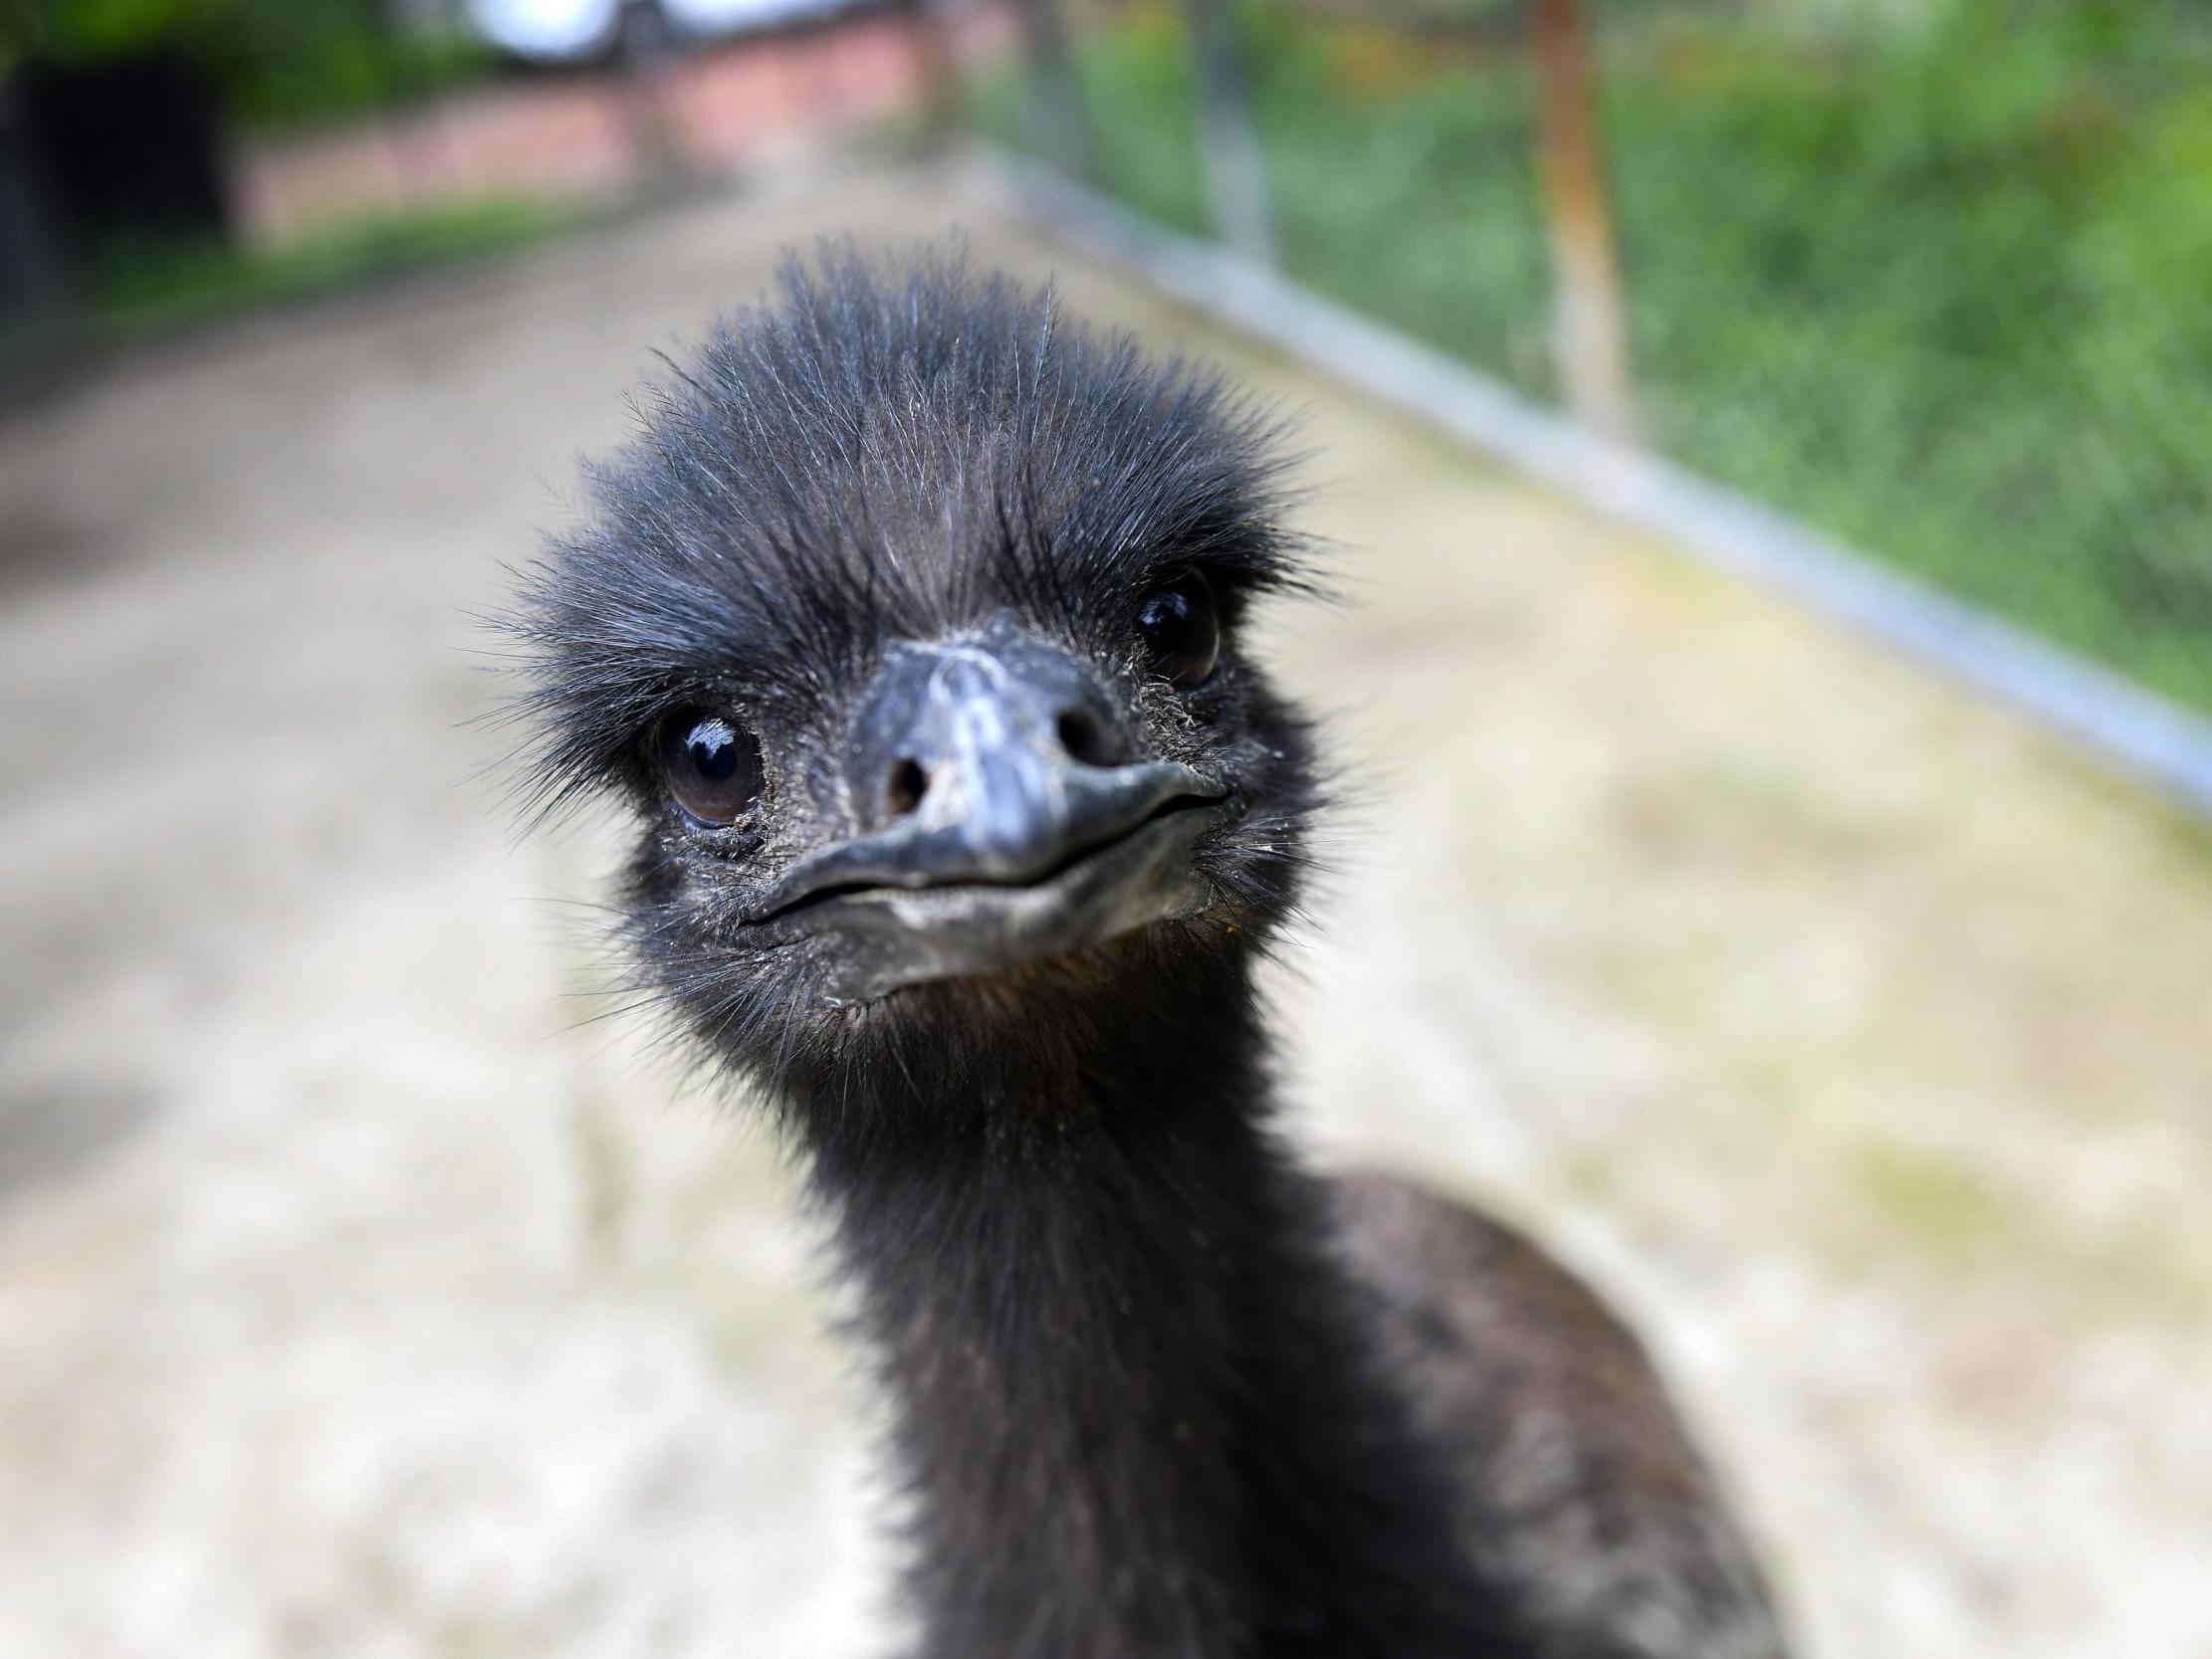 Emus can run at up to 30mph; the Ecclefechan escapee had been bought from a farm only 24 hours earlier